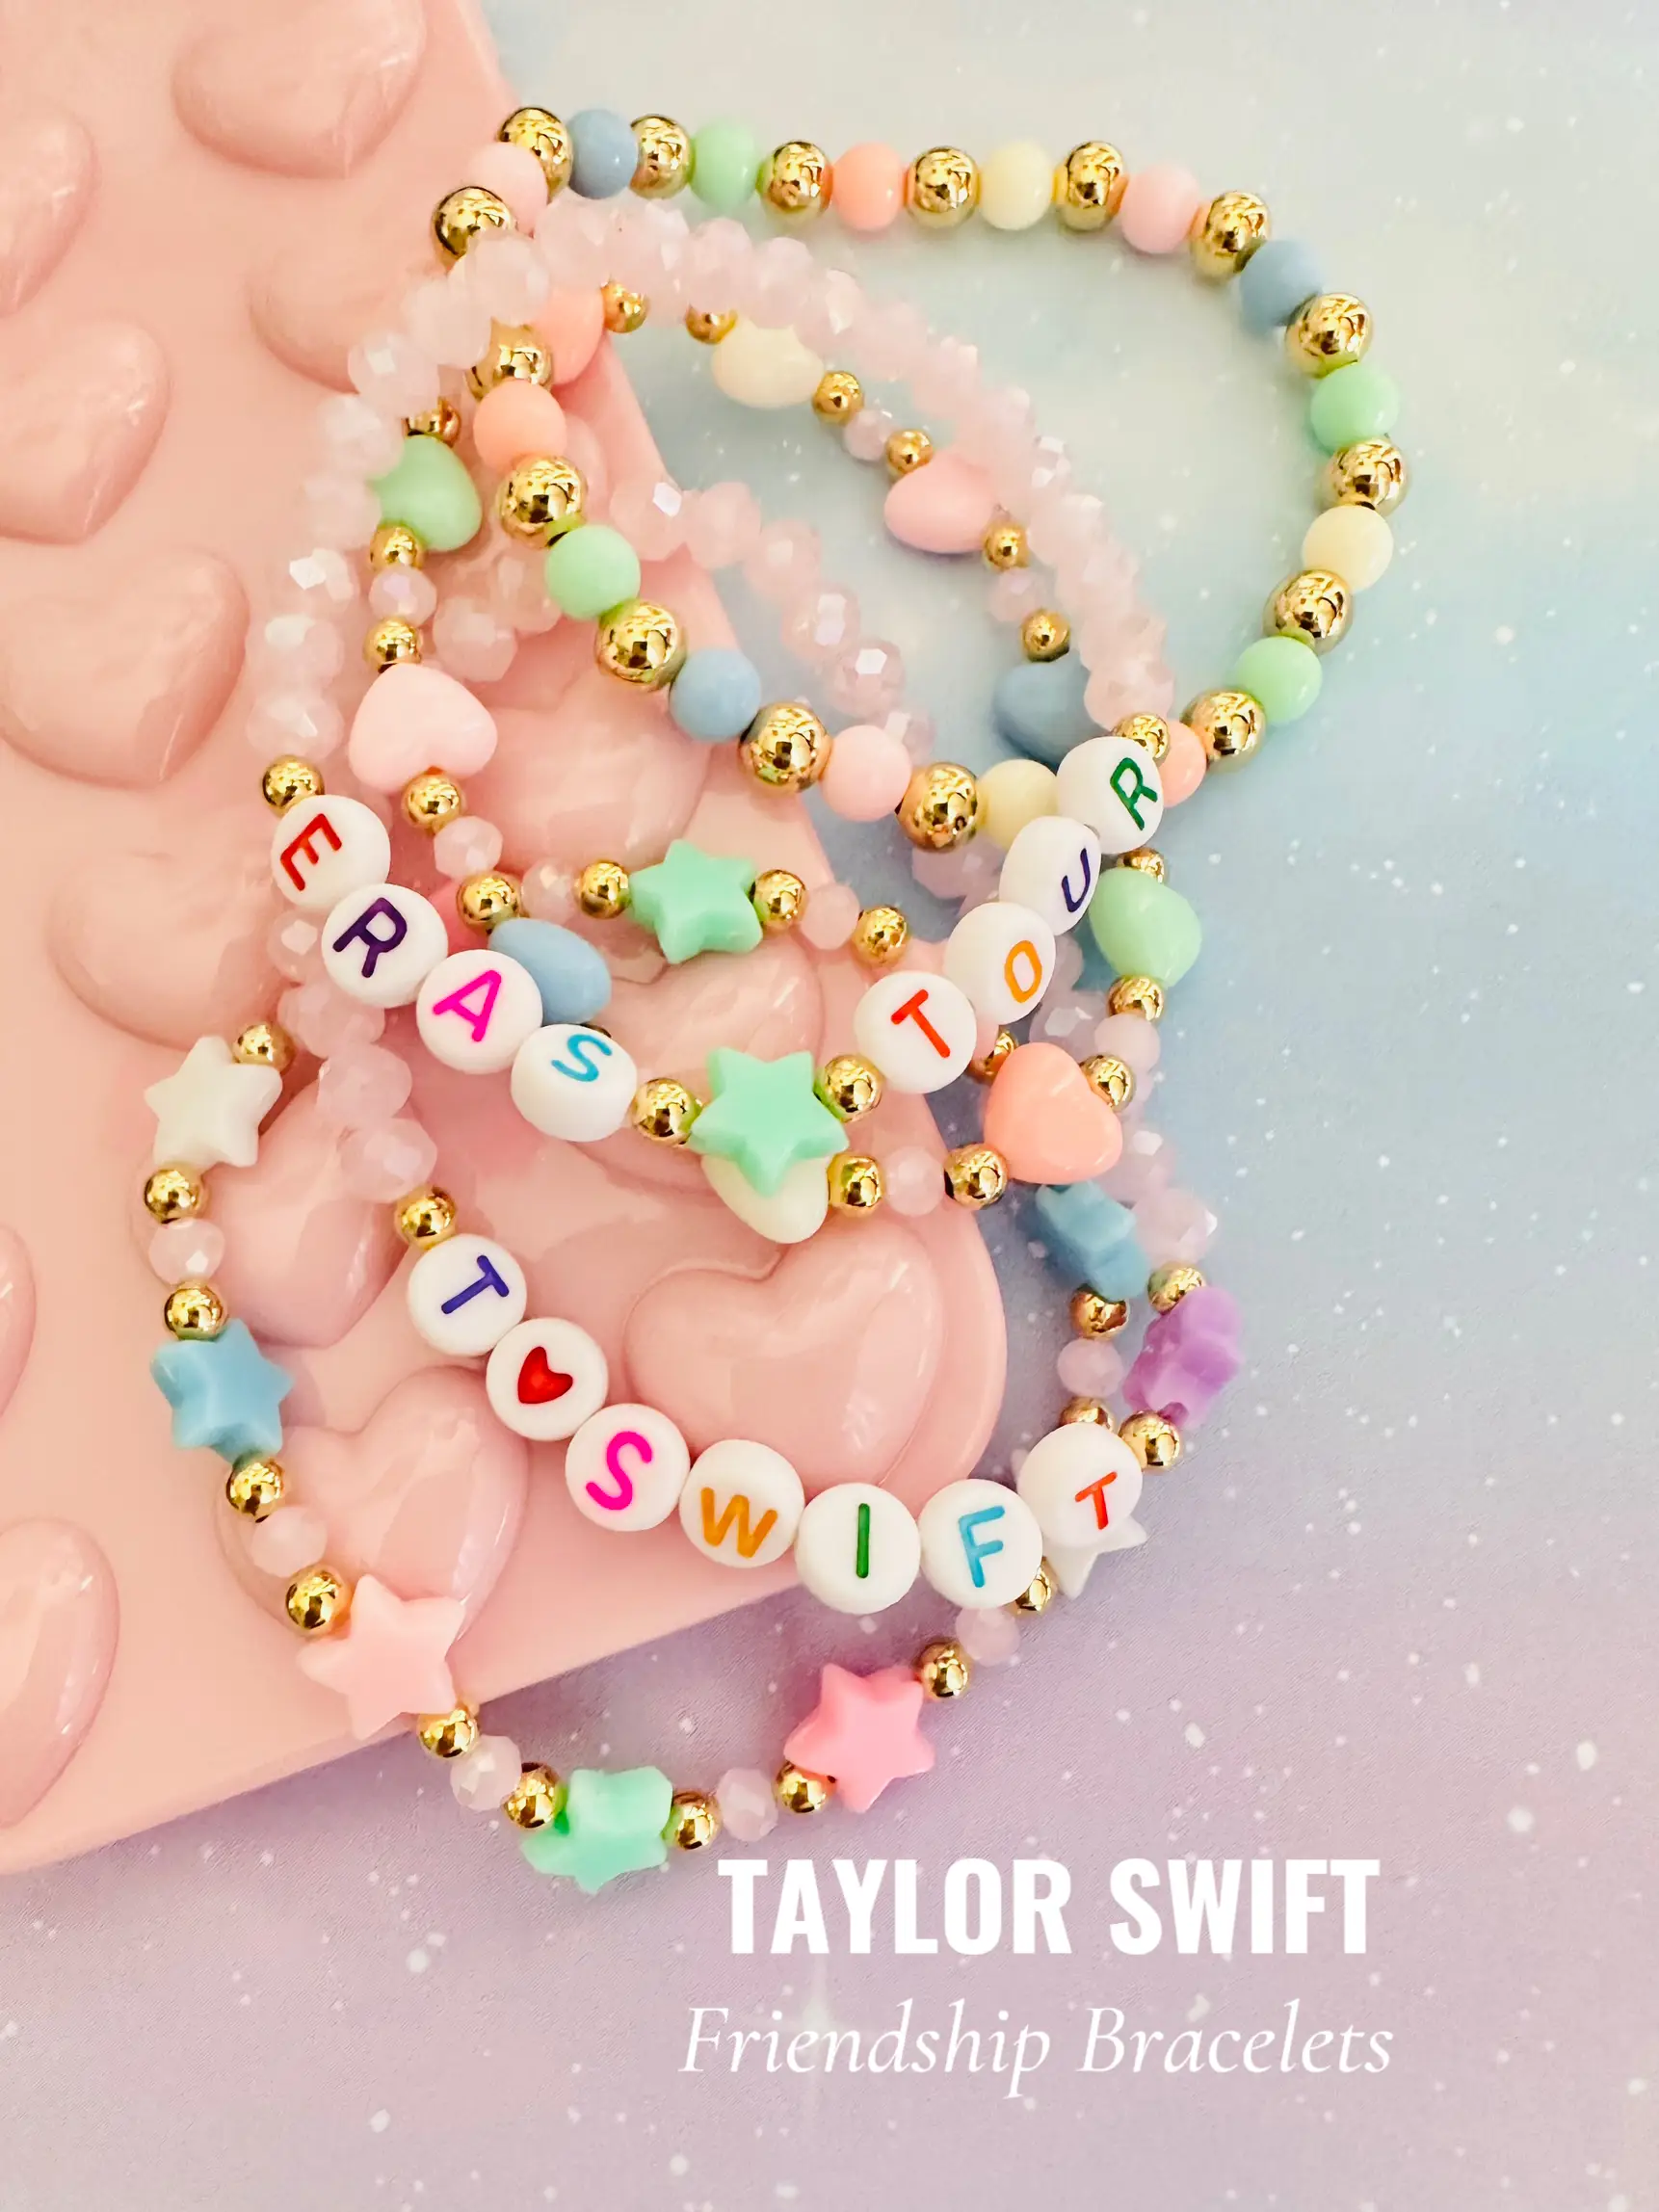 Taylor Swift Friendship Bracelet Ideas for Clothing & Accessories